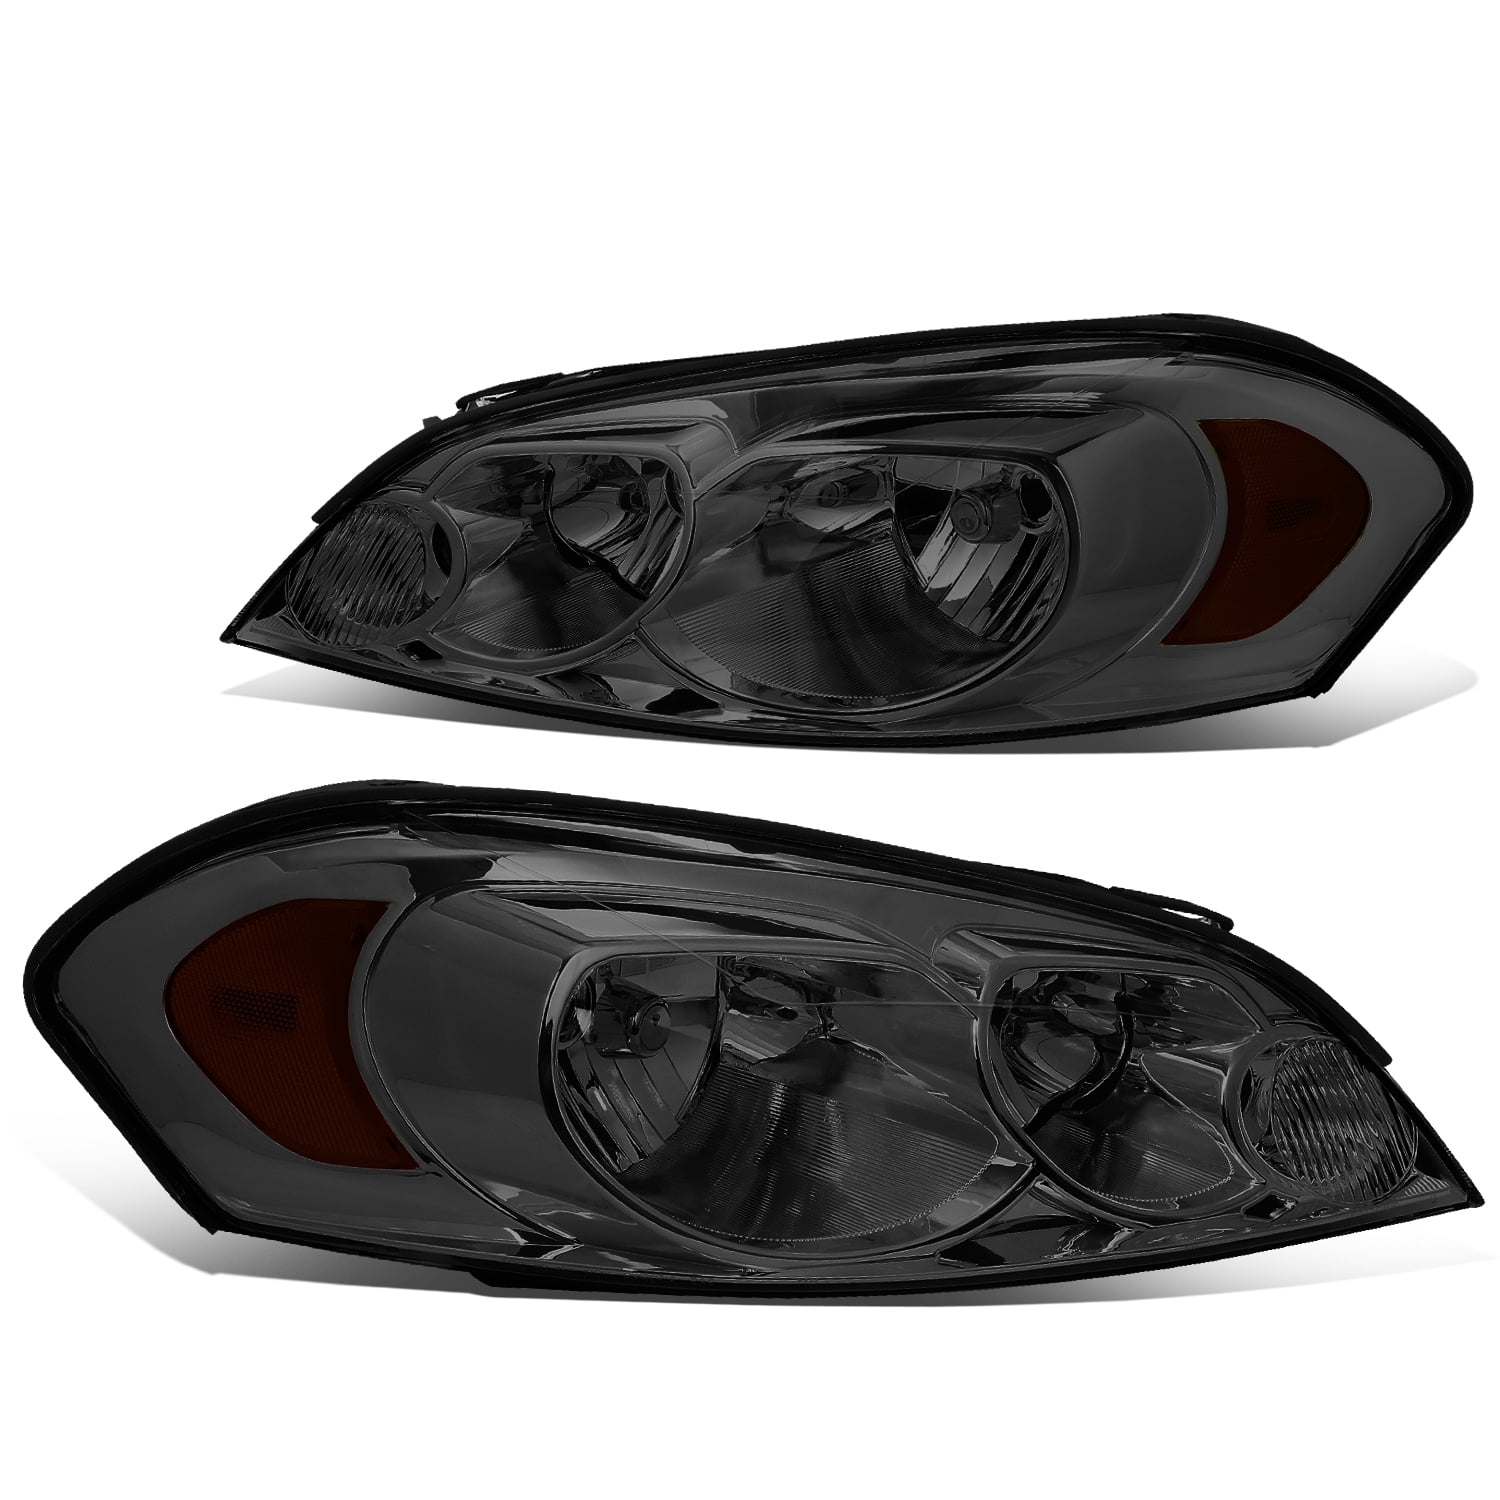 DNA Motoring HL-OH-CI06-BK-AM Black Amber Headlights Compatible with 06-13 Impala 